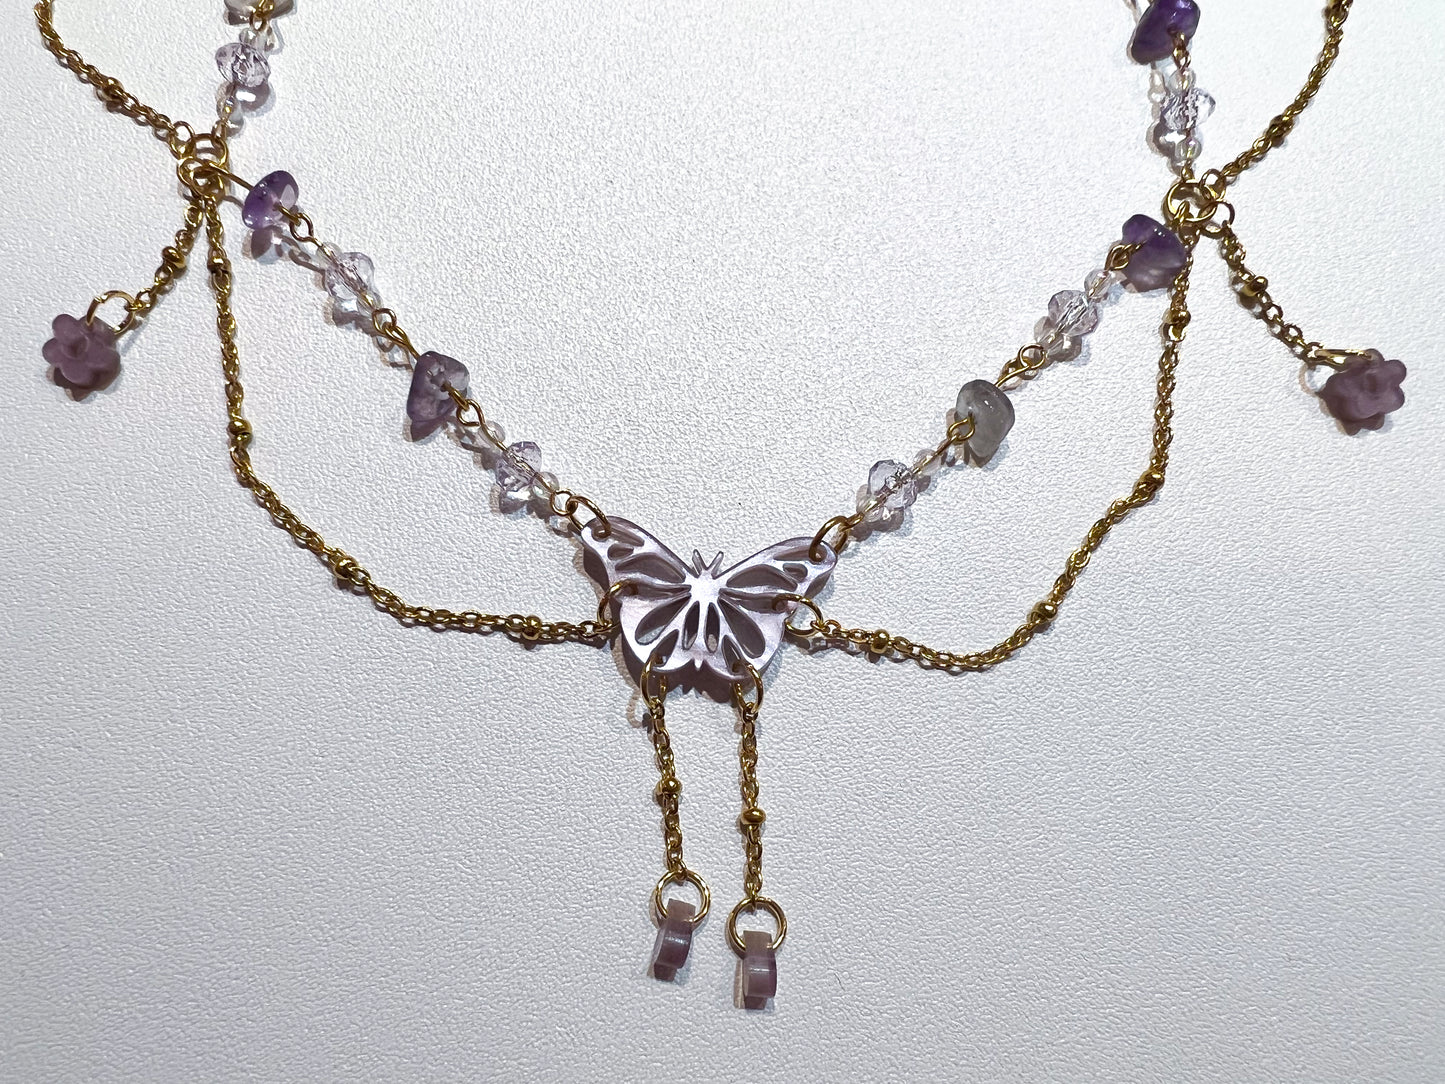 Mariposa - butterfly necklace